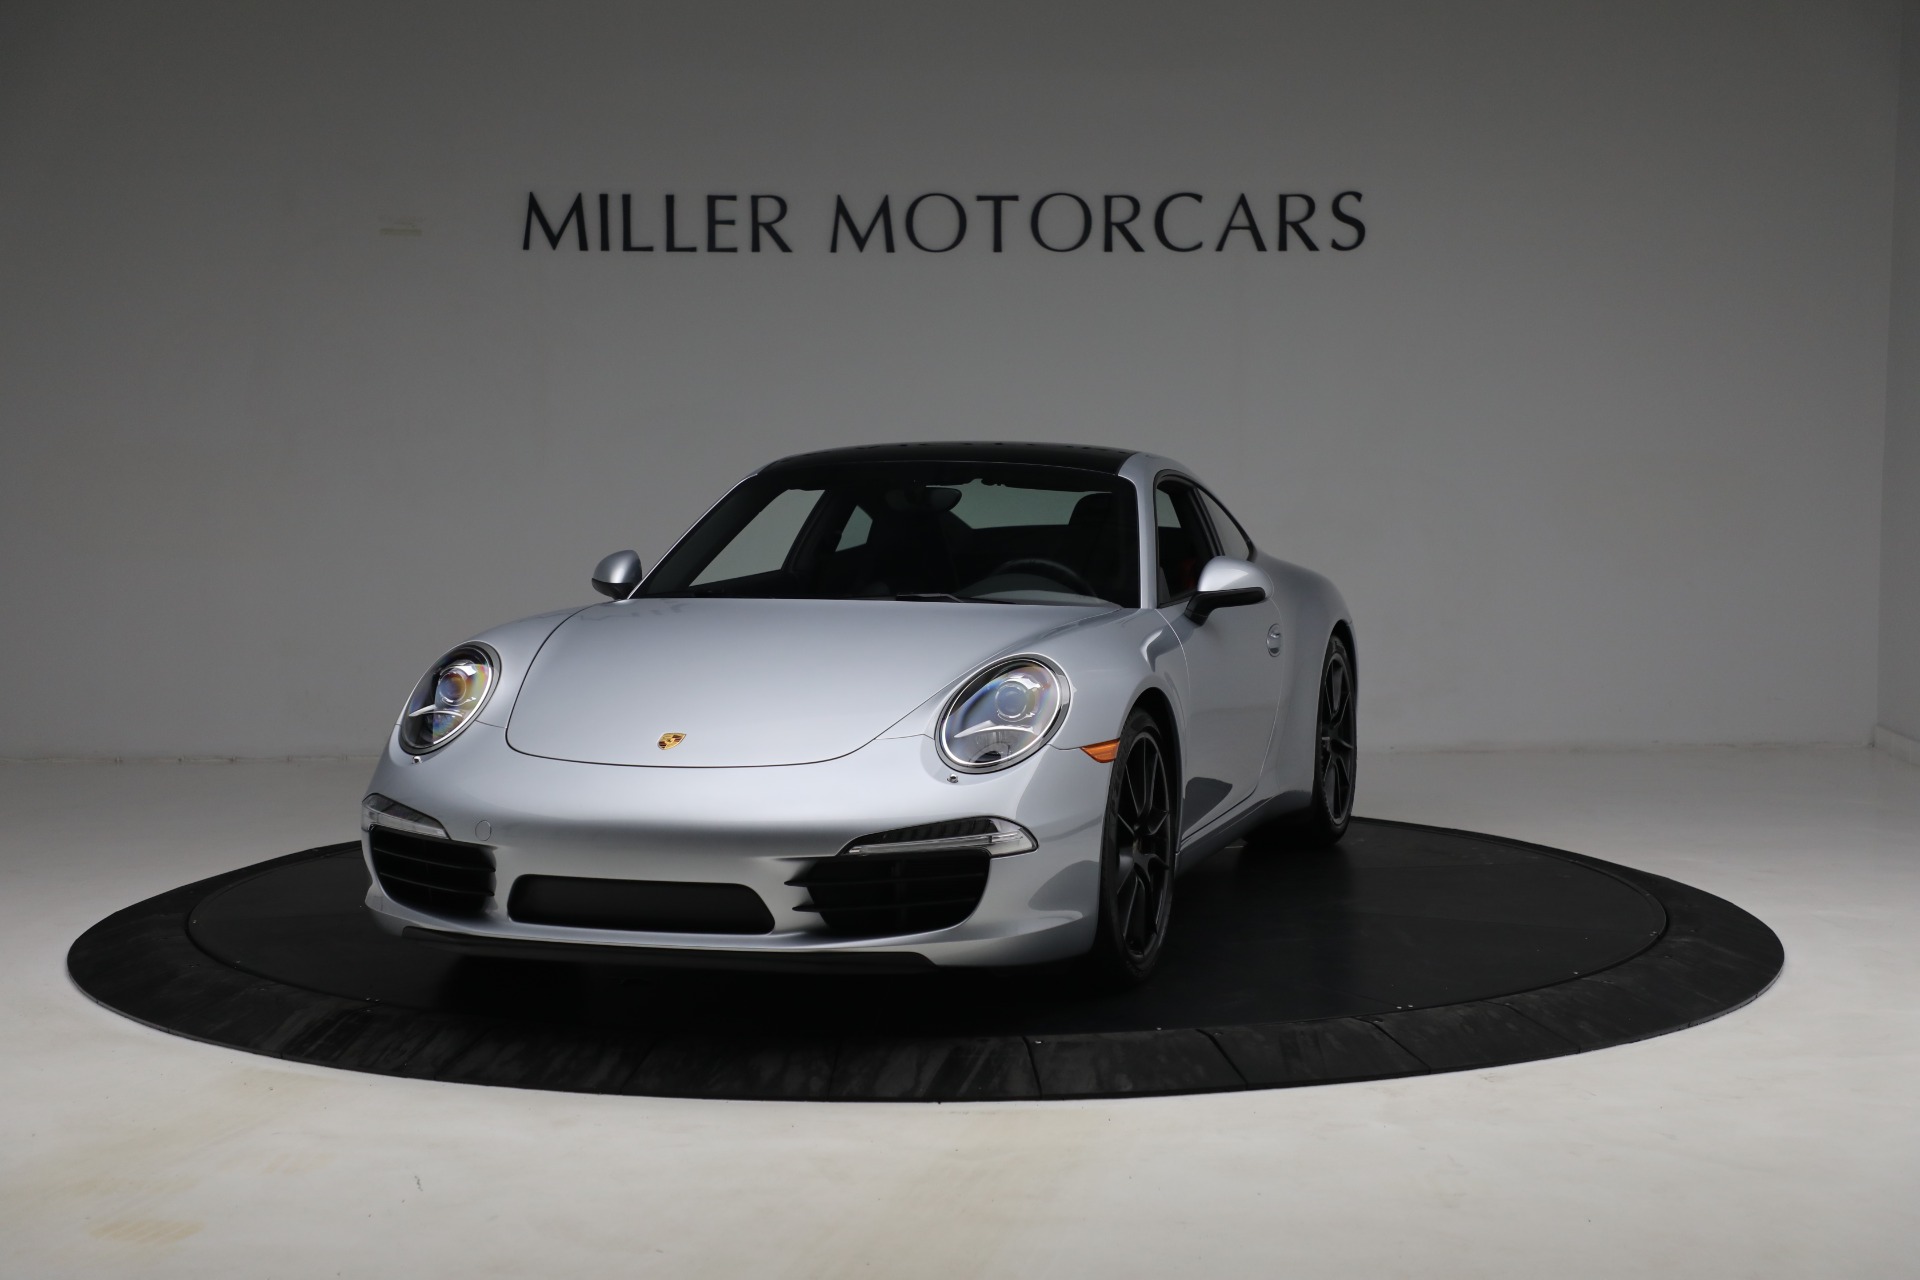 Used 2015 Porsche 911 Carrera S for sale Sold at Pagani of Greenwich in Greenwich CT 06830 1